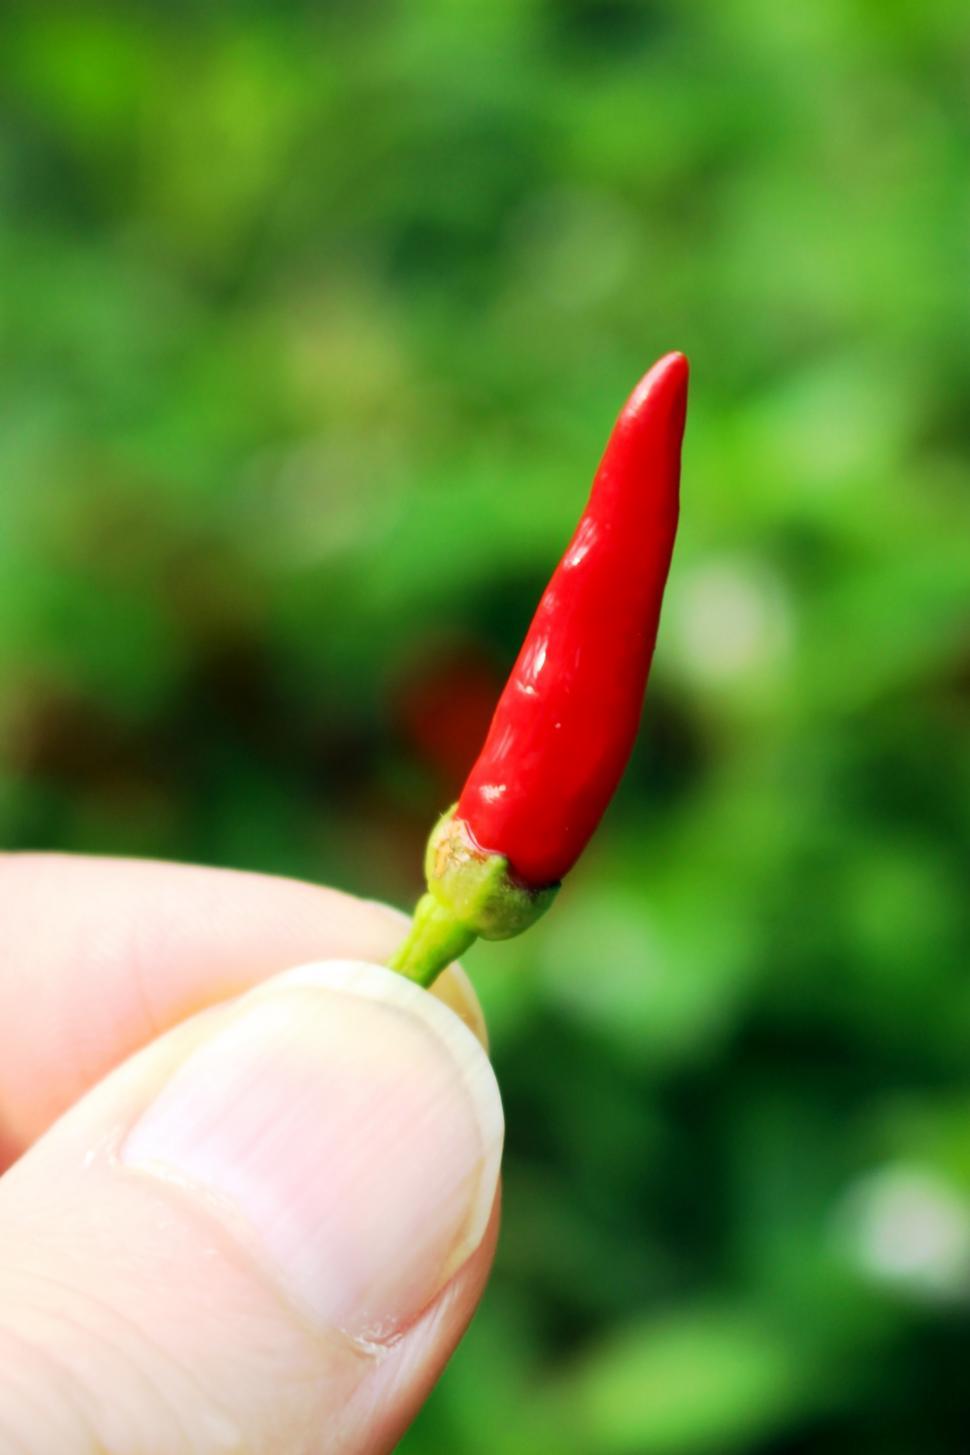 Free Image of Red chili peper held by a person  